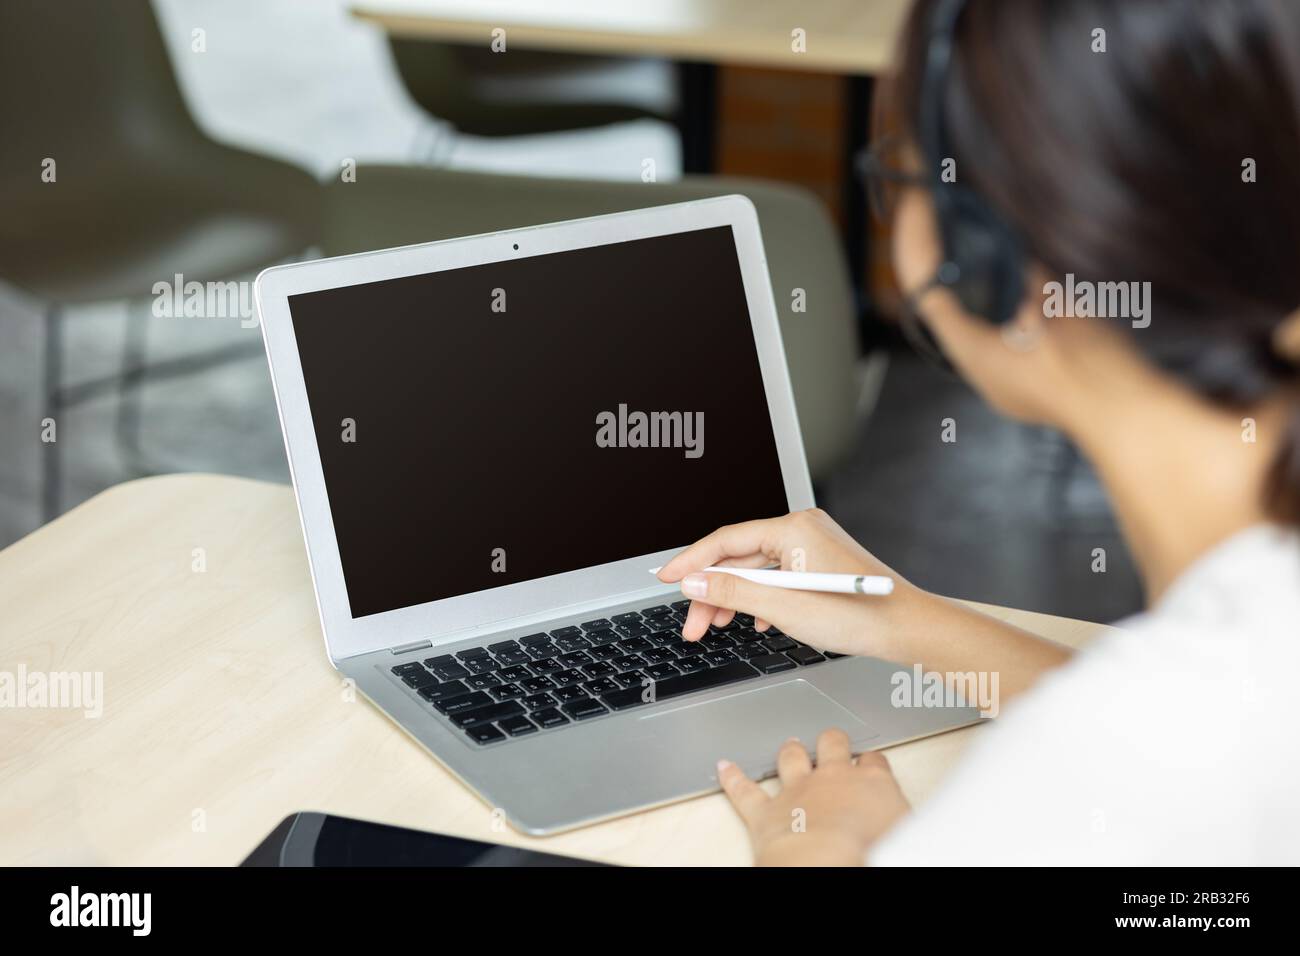 people working on laptop with blank copy space screen for advertising text image overlay in office desk, Back view of business woman hands busy using Stock Photo